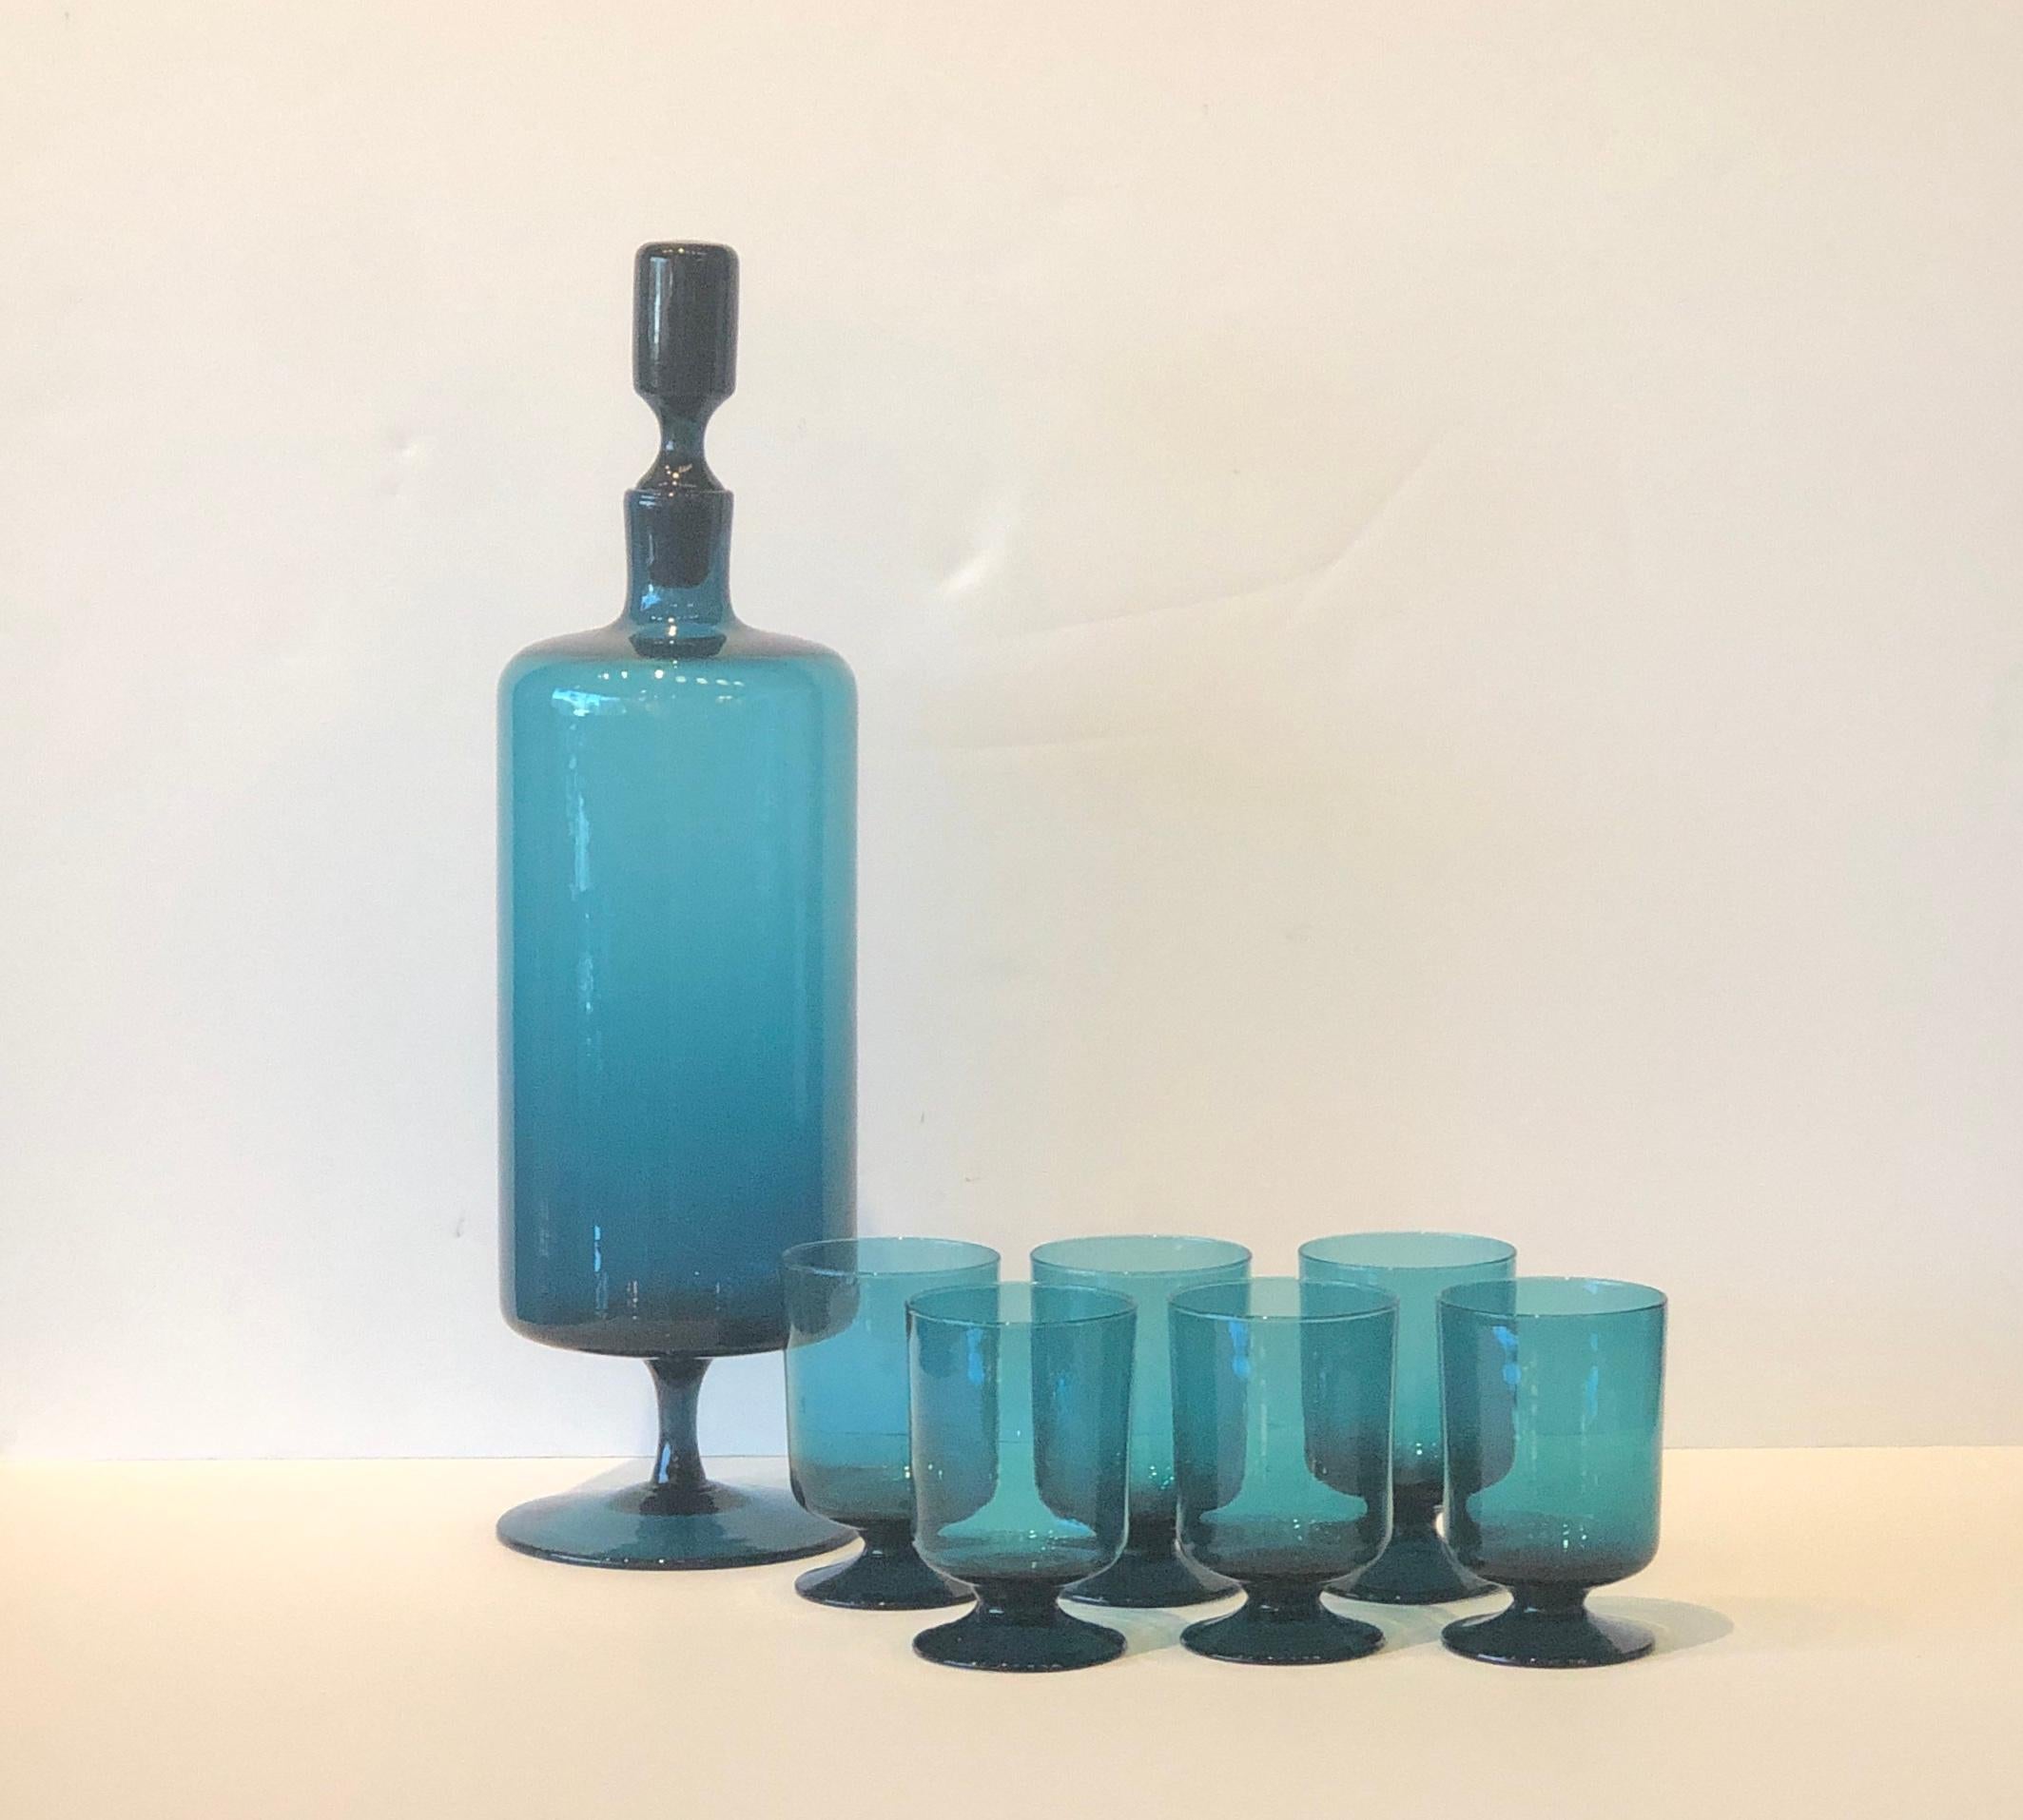 Offered is a beautiful Mid-Century Modern translucent teal blue blown set of six petite stem glasses with a matching tall slender blown glass decanter with a lovely glass stopper. This is truly elegant barware that is both functional and decorative.